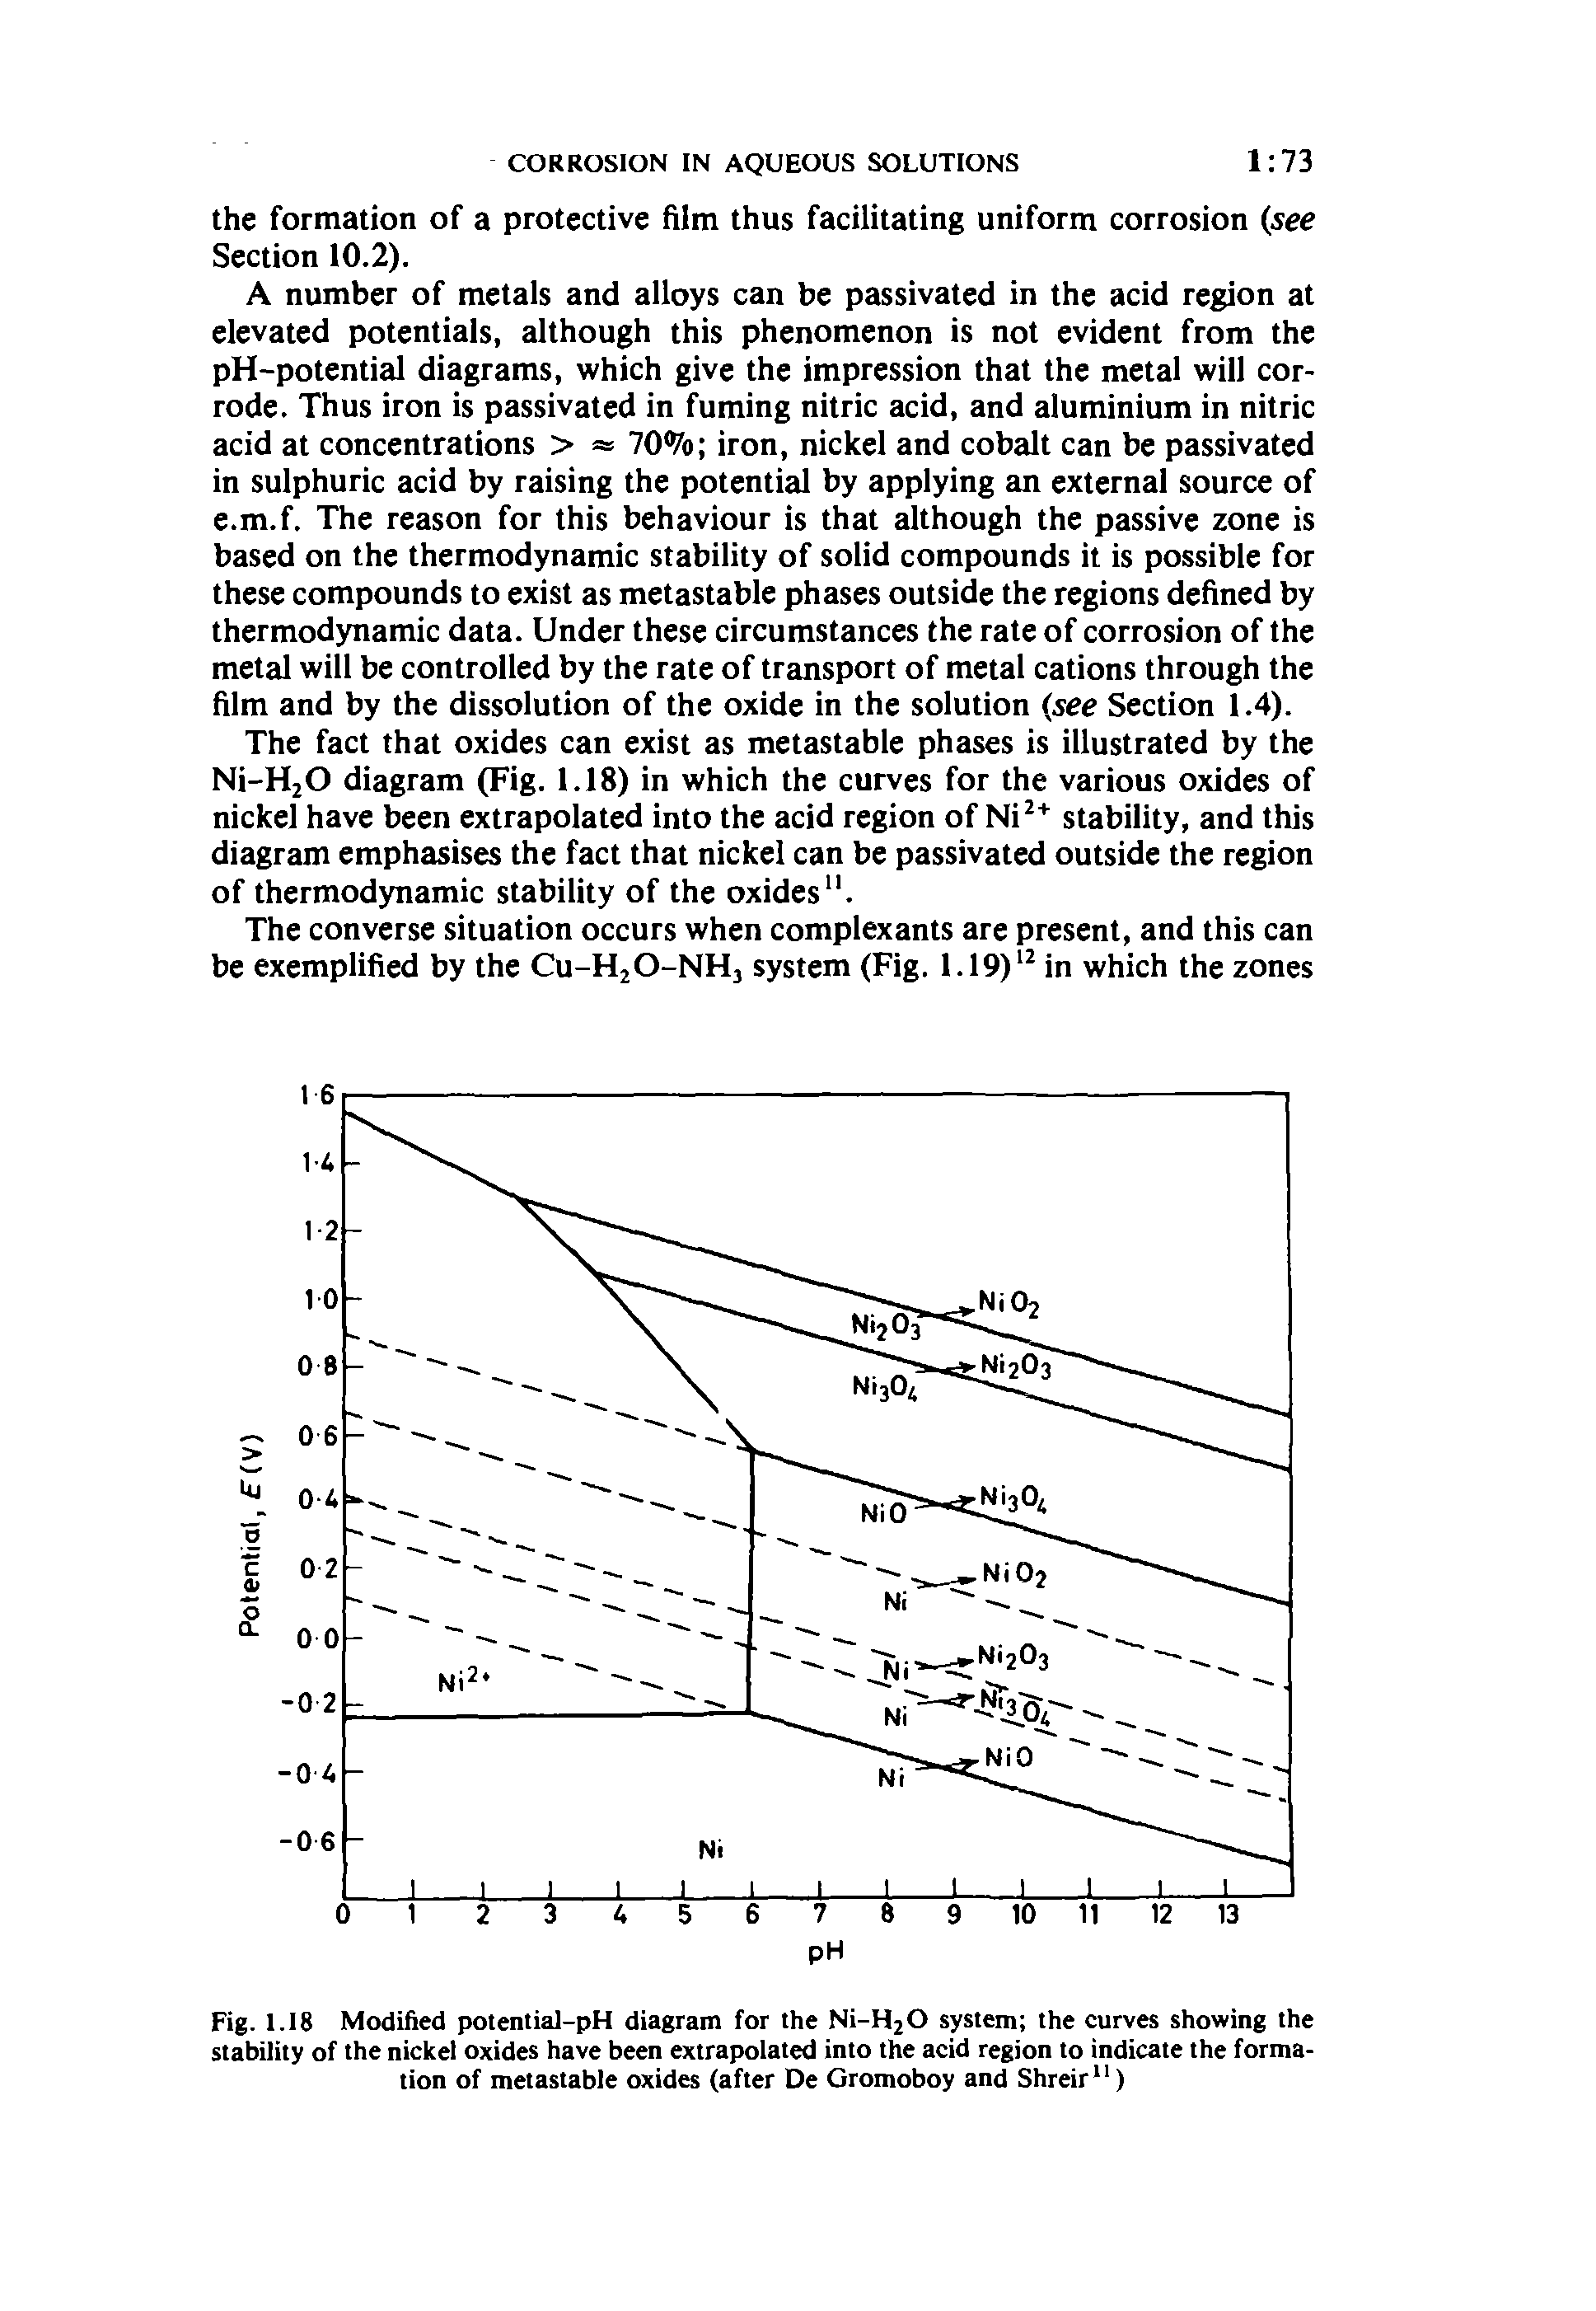 Fig. 1.18 Modified potential-pH diagram for the Ni-H20 system the curves showing the stability of the nickel oxides have been extrapolated into the acid region to indicate the formation of metastable oxides (after De Gromoboy and Shreir")...